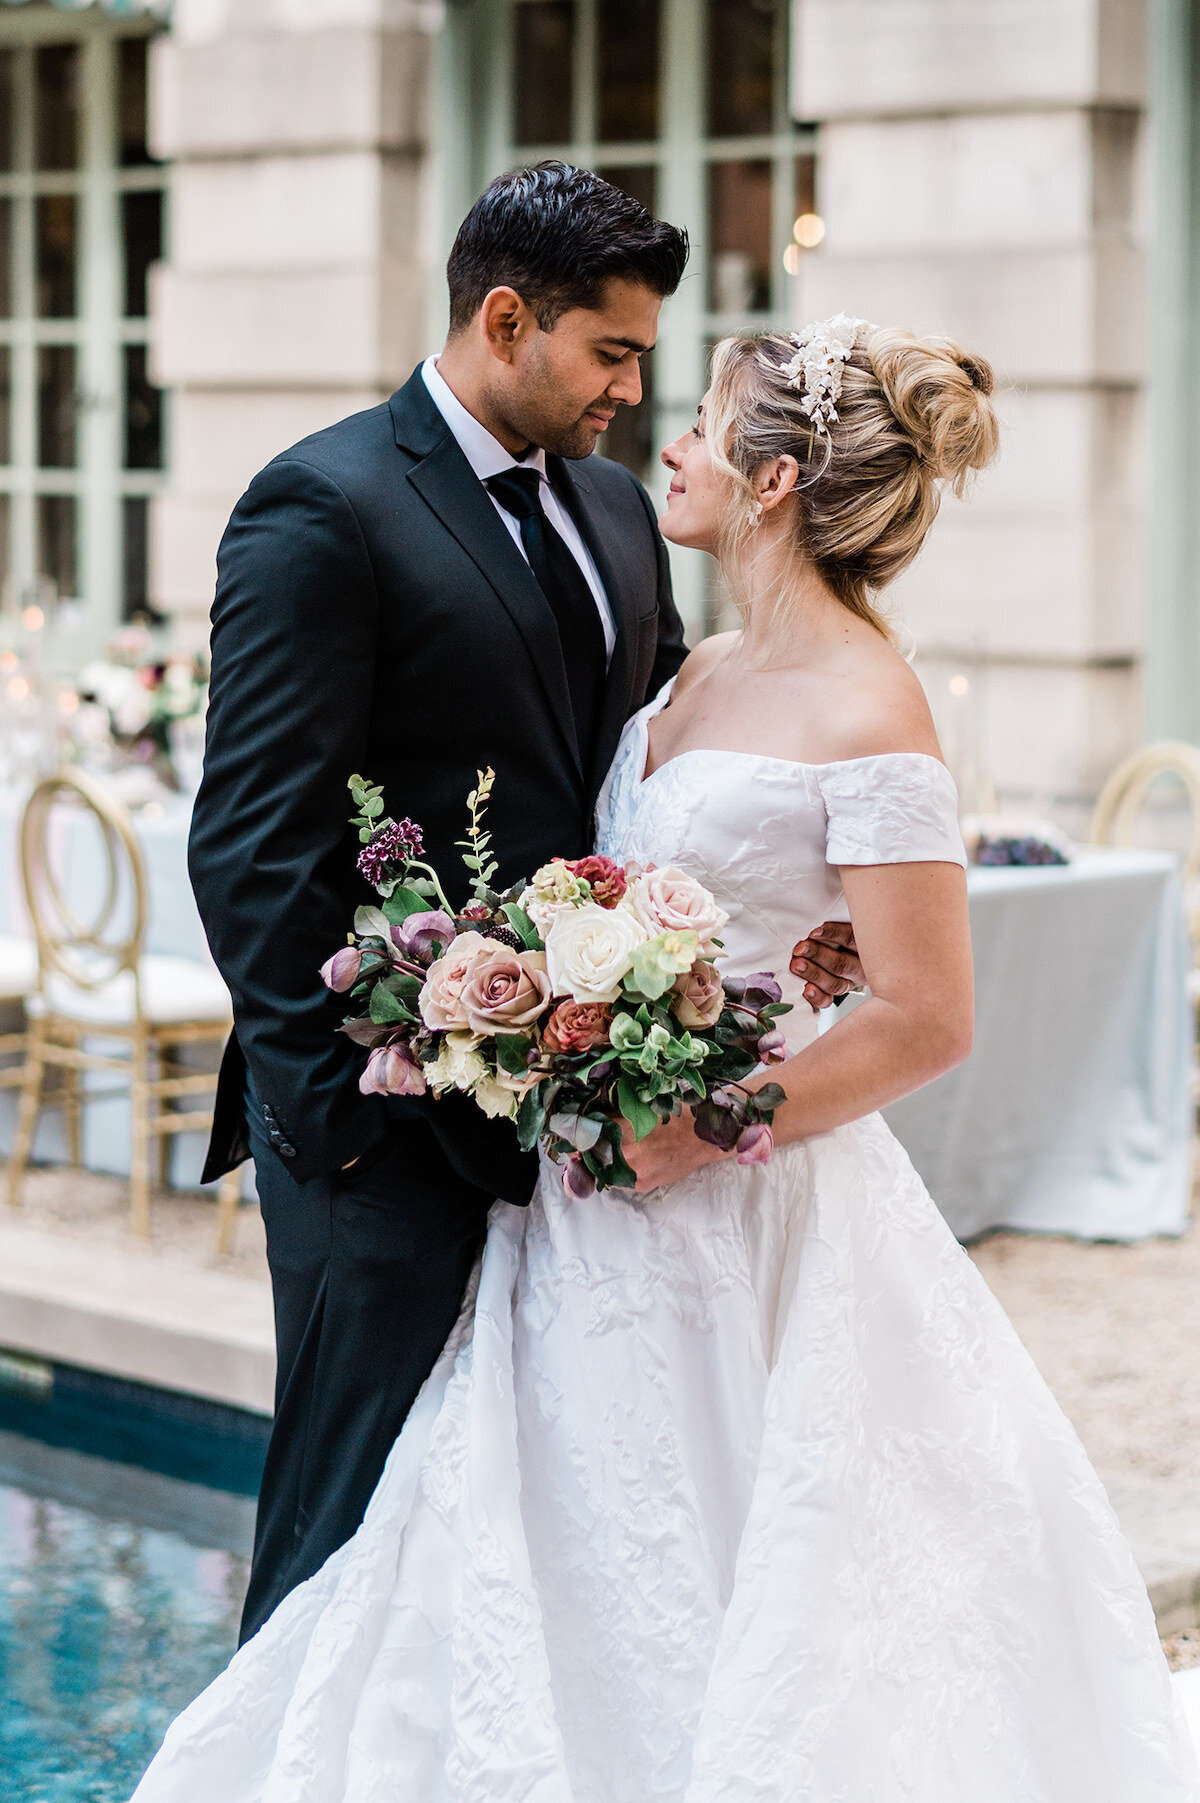 Elevate your wedding experience with the sophistication of fine art aesthetics in DC. Amidst historical charm and architectural elegance, we blend luxury and artistry to capture your love's essence in every frame.